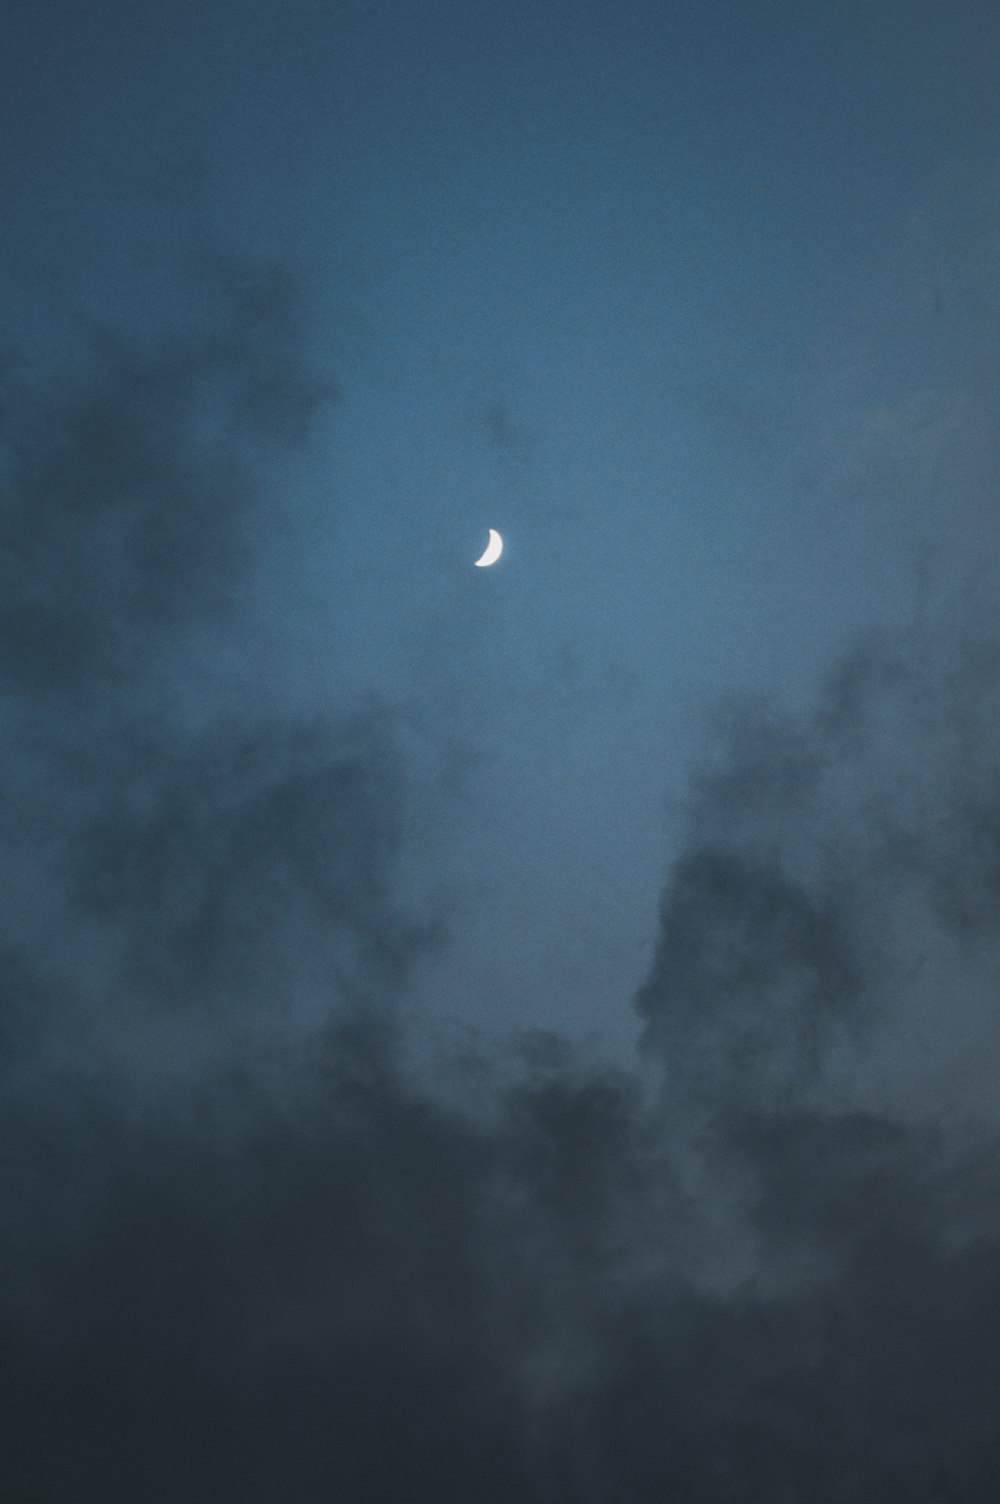 the moon is seen through the dark clouds